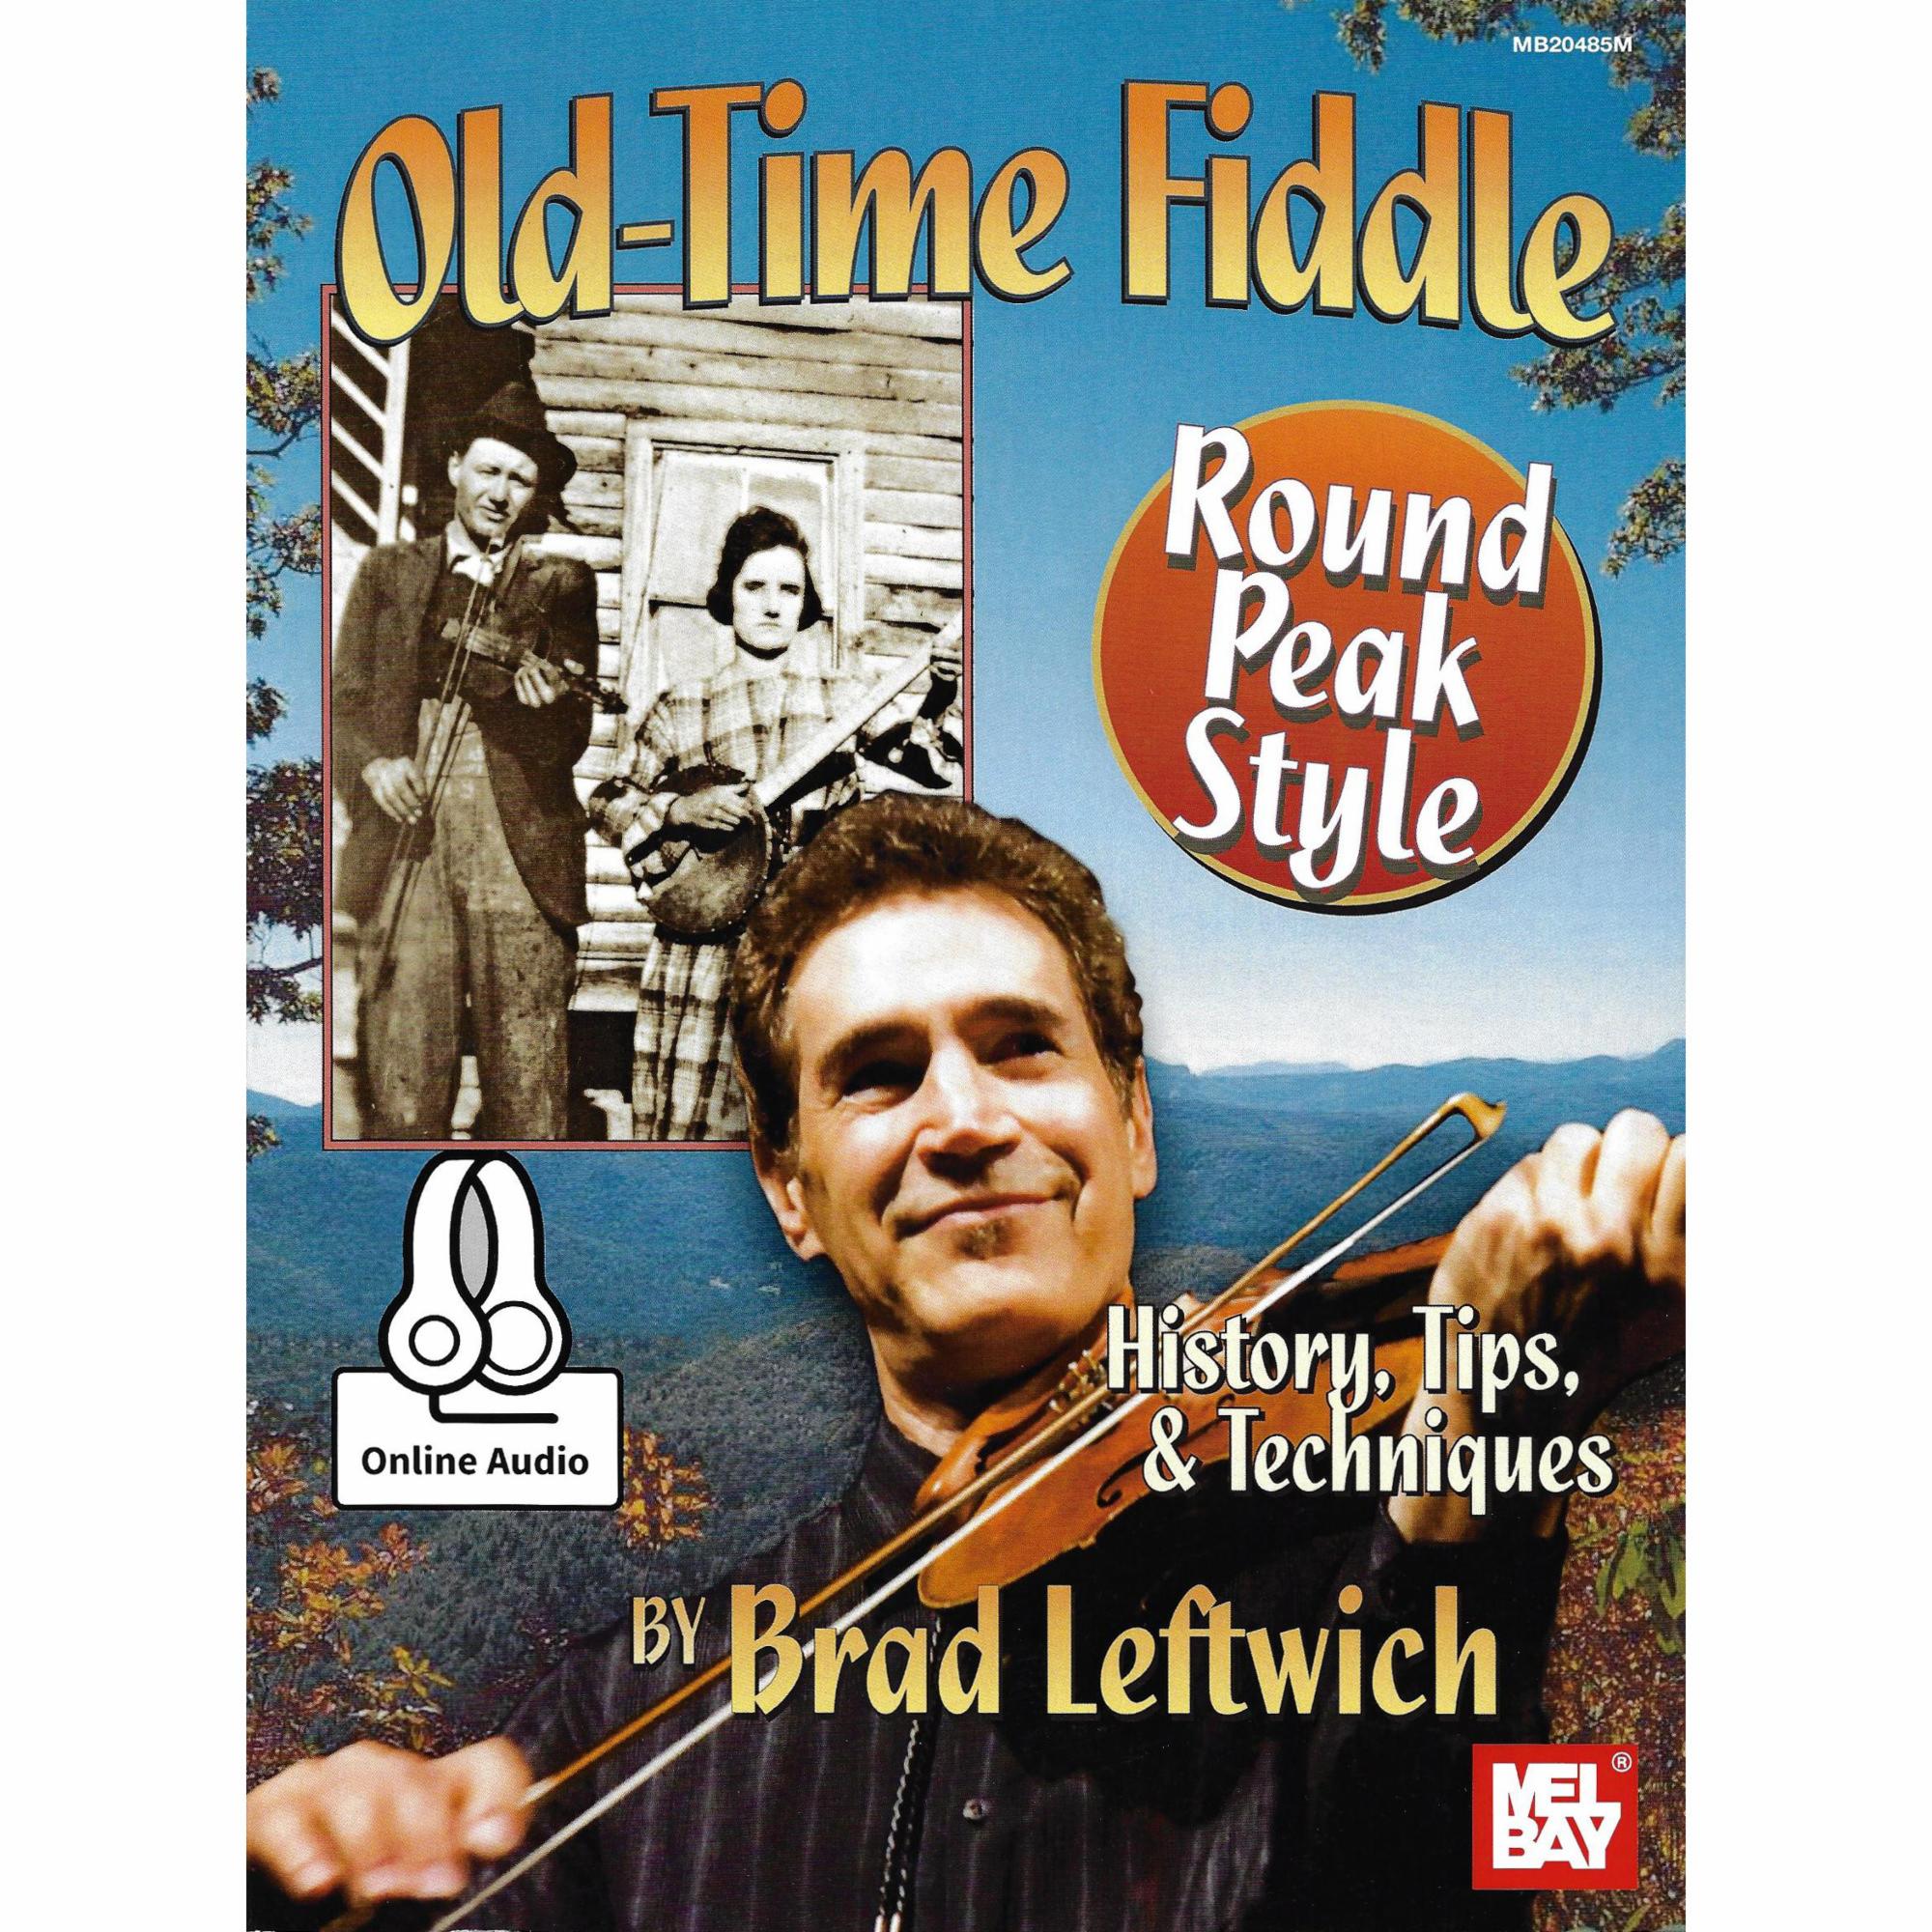 Old-Time Fiddle: Round Peak Style